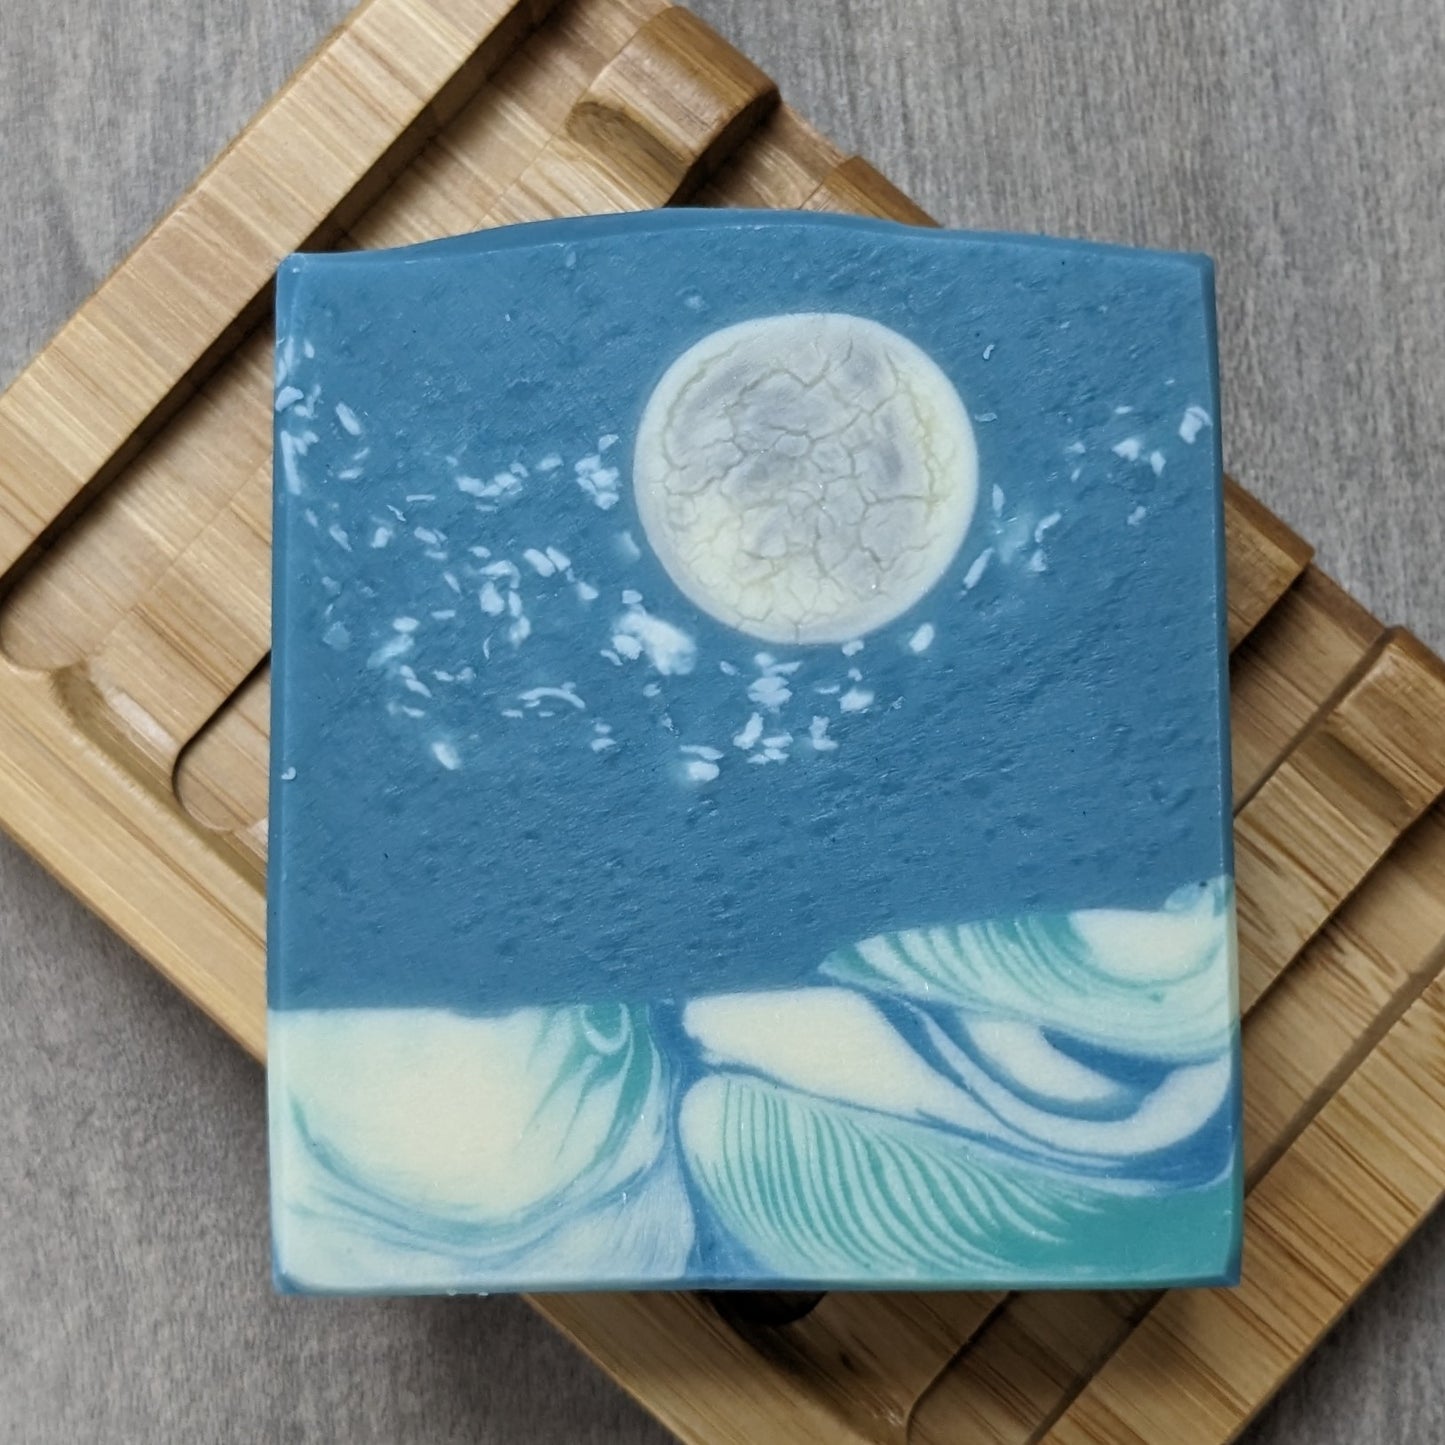 Soap with moon ans and water design on soap dish